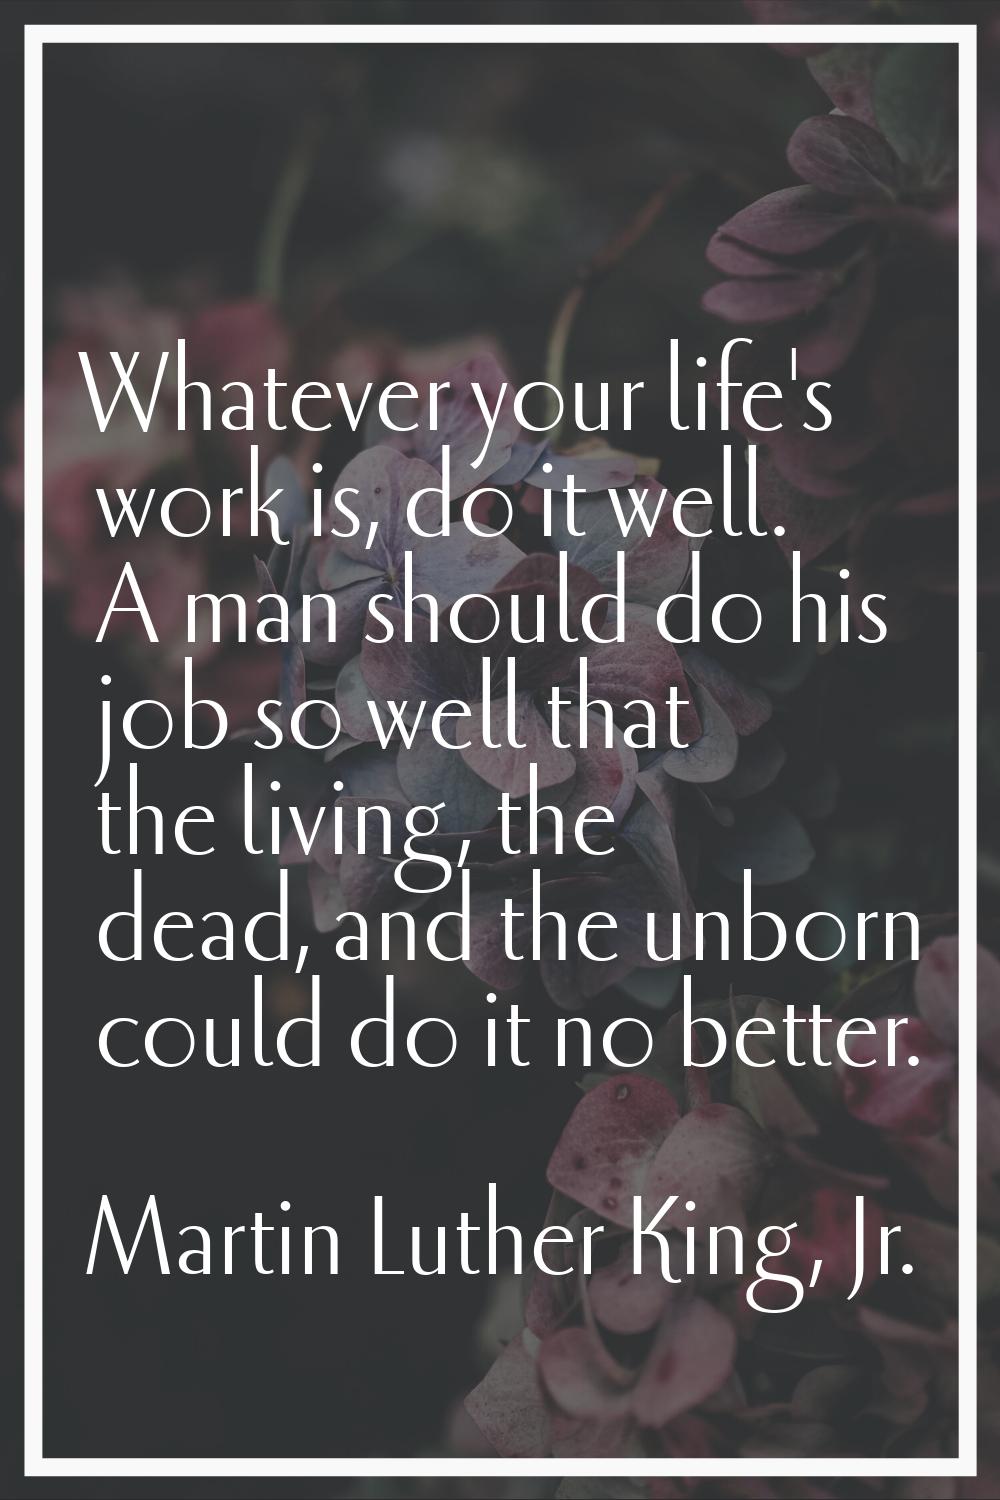 Whatever your life's work is, do it well. A man should do his job so well that the living, the dead